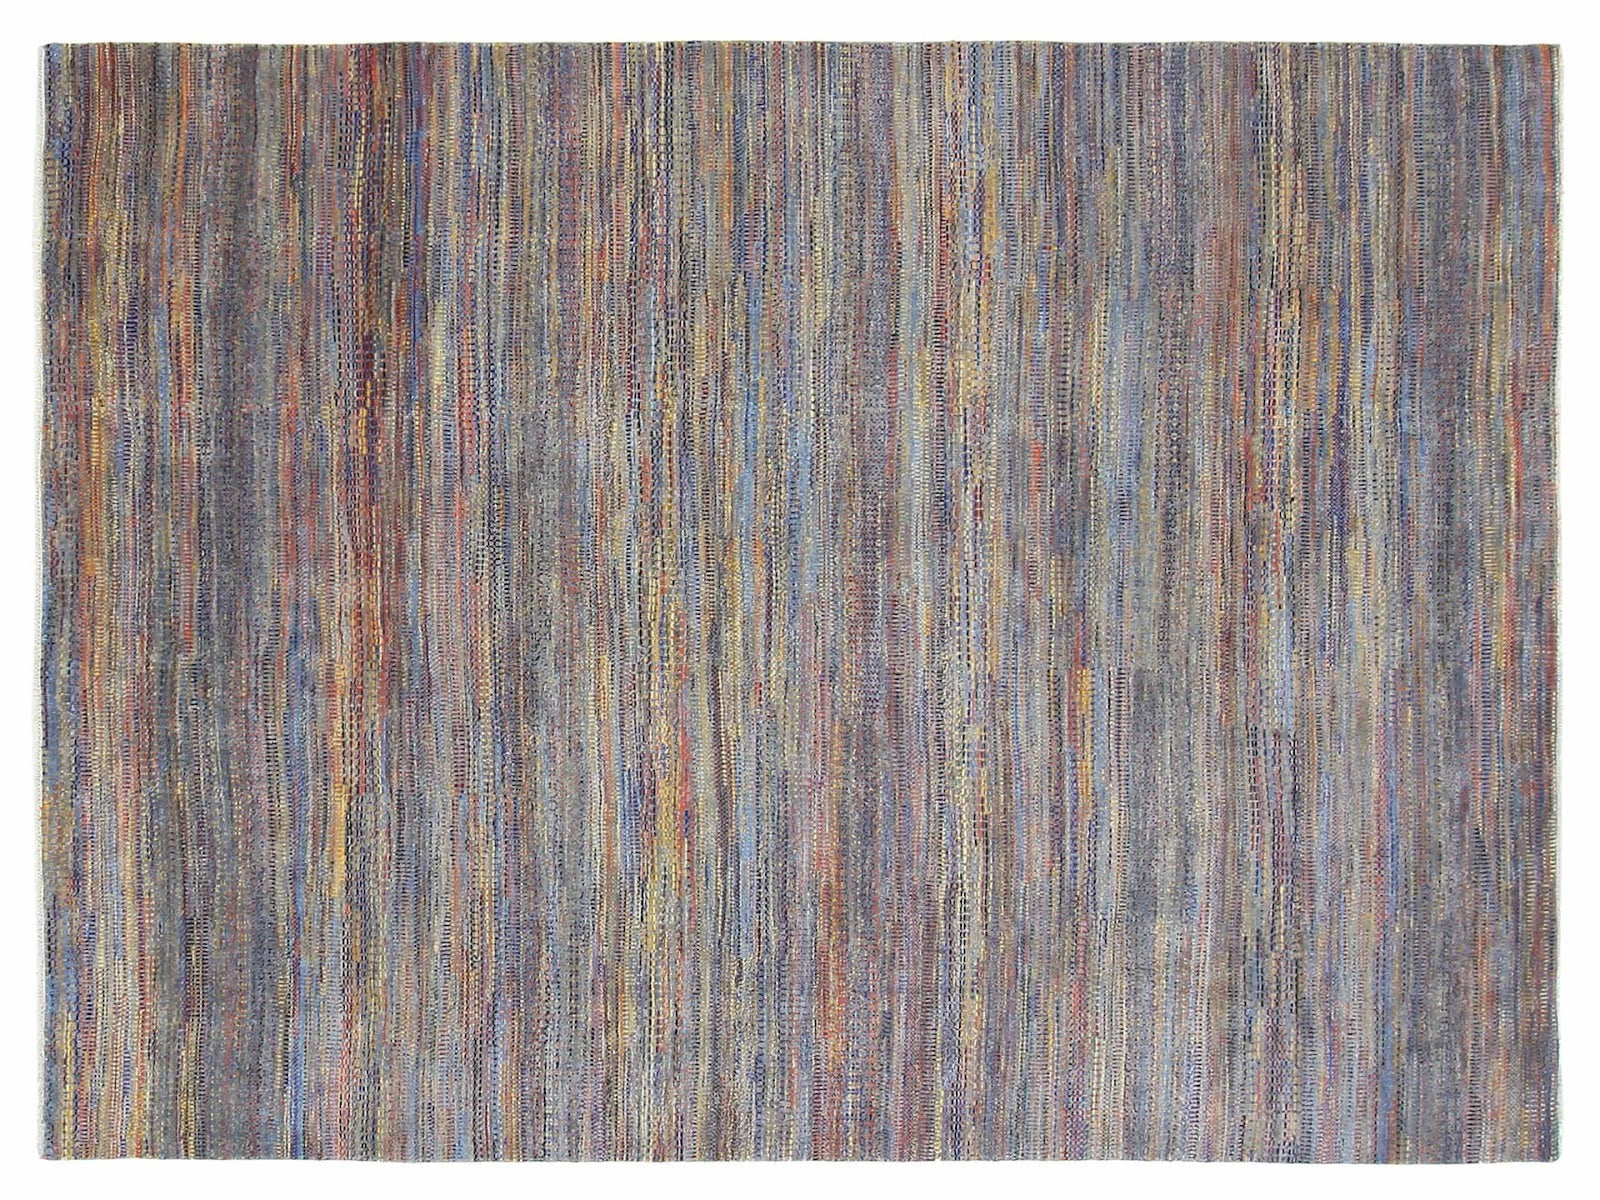 9x12 contemporary hand-knotted rug made of wool and viscose, with navy blue center and vibrant rainbow borders